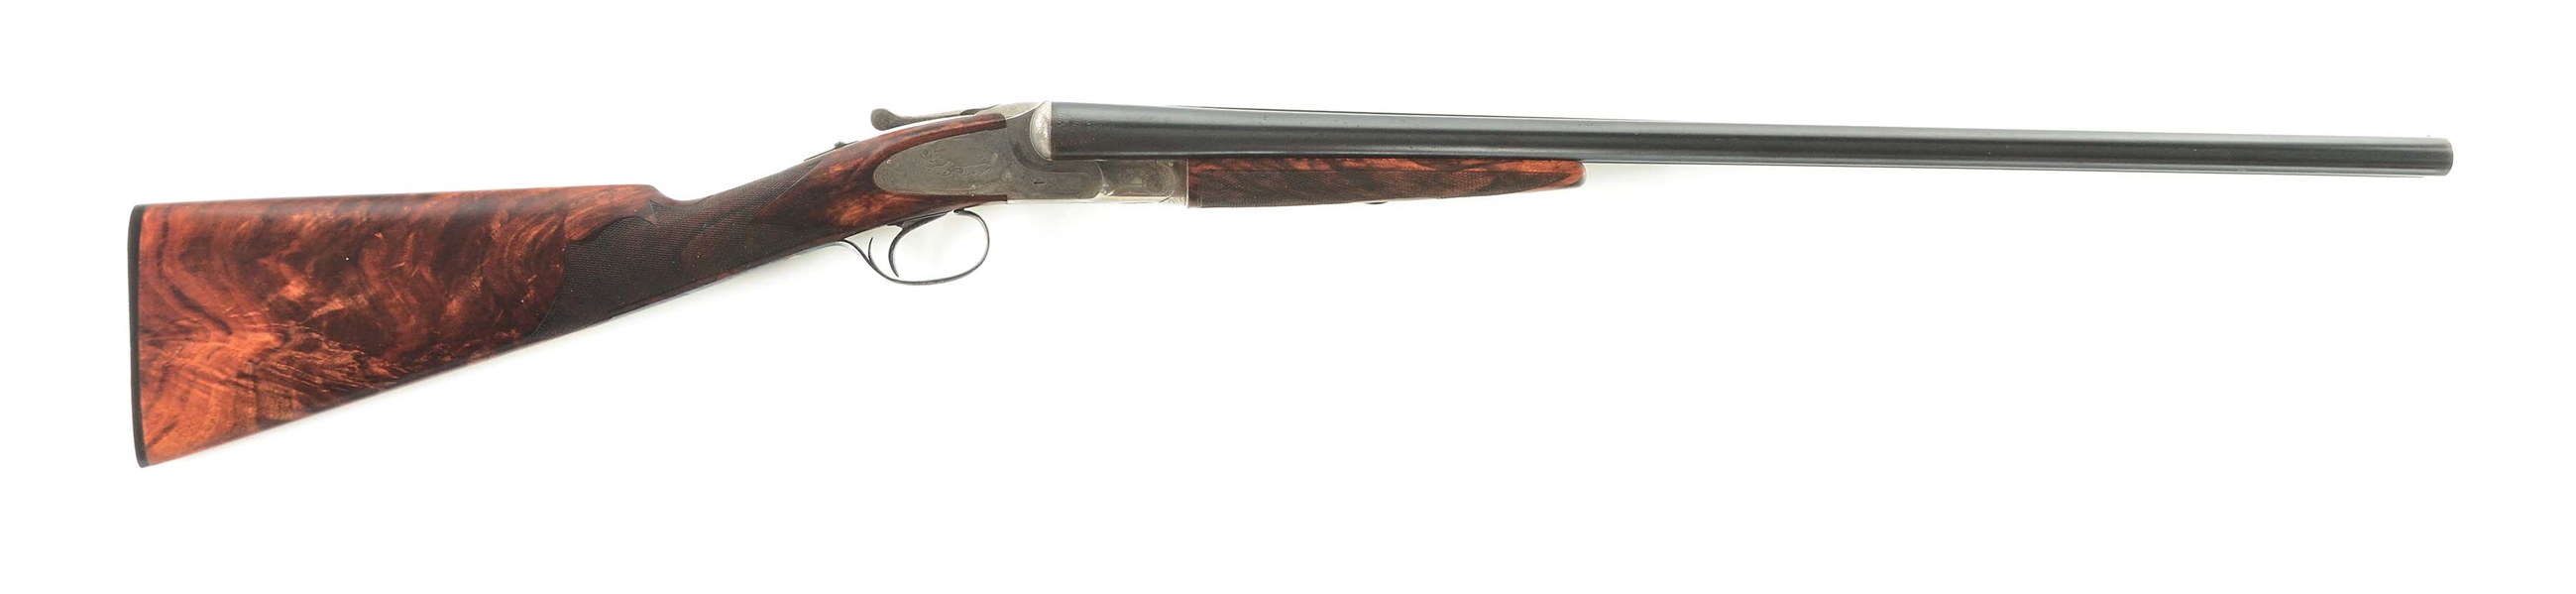 (C) THIRTIES VINTAGE L.C. SMITH "CROWN" GRADE FEATHERWEIGHT 12 BORE SHOTGUN WITH SINGLE TRIGGER AND EJECTORS WITH FACTORY LETTER.